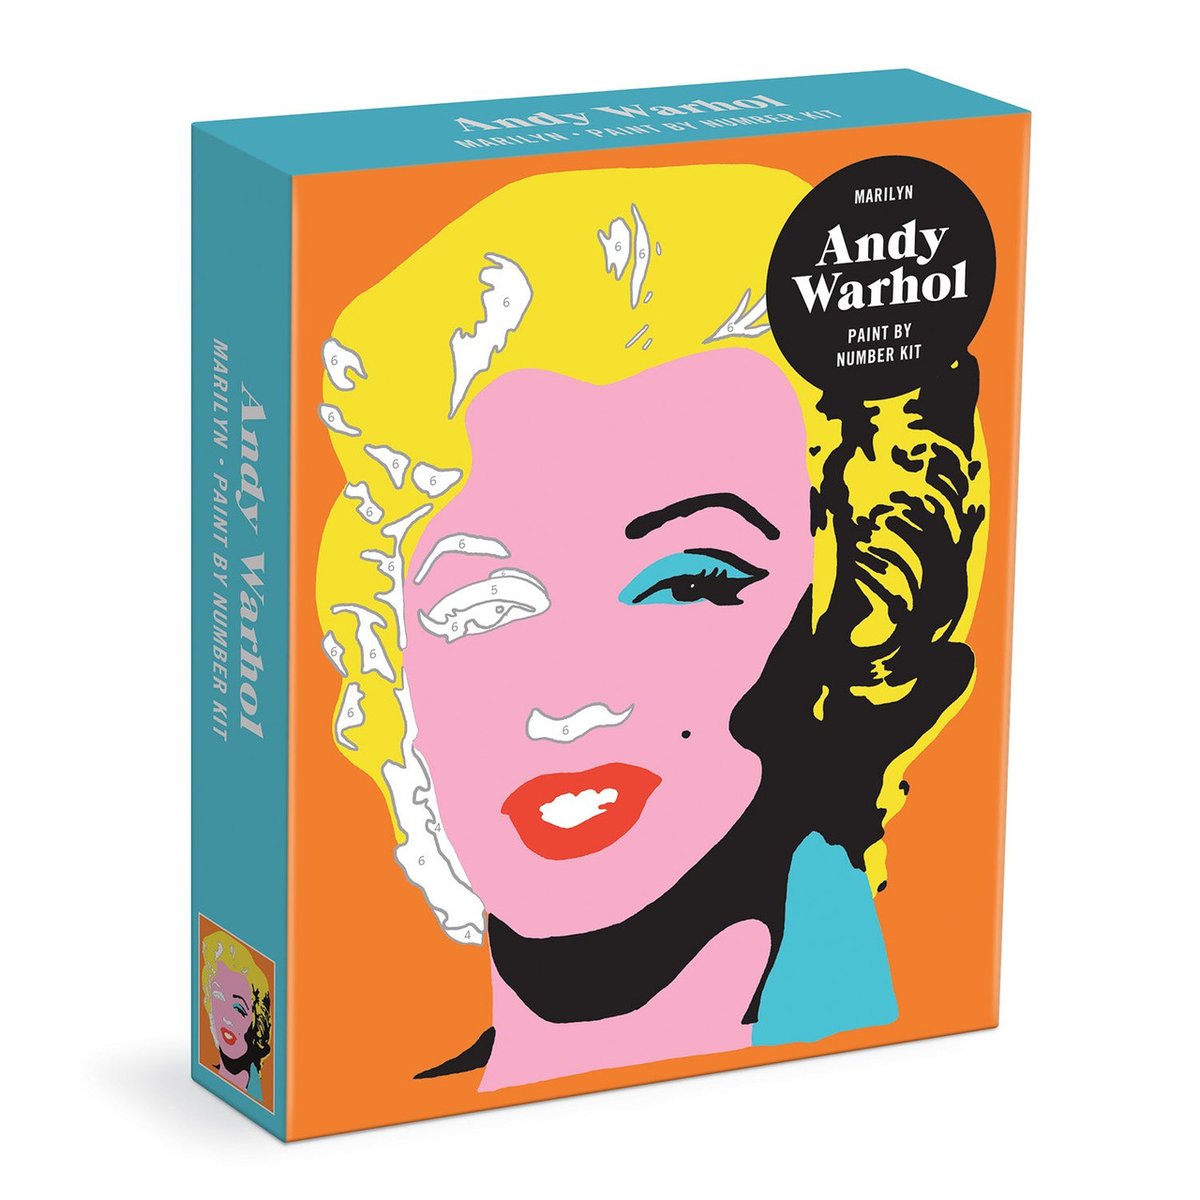 $5 shipping for five days at The Warhol Store online! Now through May 18, receive $5 flat-rate shipping on your order*: bit.ly/3ewwHBb *On orders up to 20 pounds. Available for all continental US orders. #AndyWarhol #warhol #KAWS #KeithHaring #MarilynMonroe #art